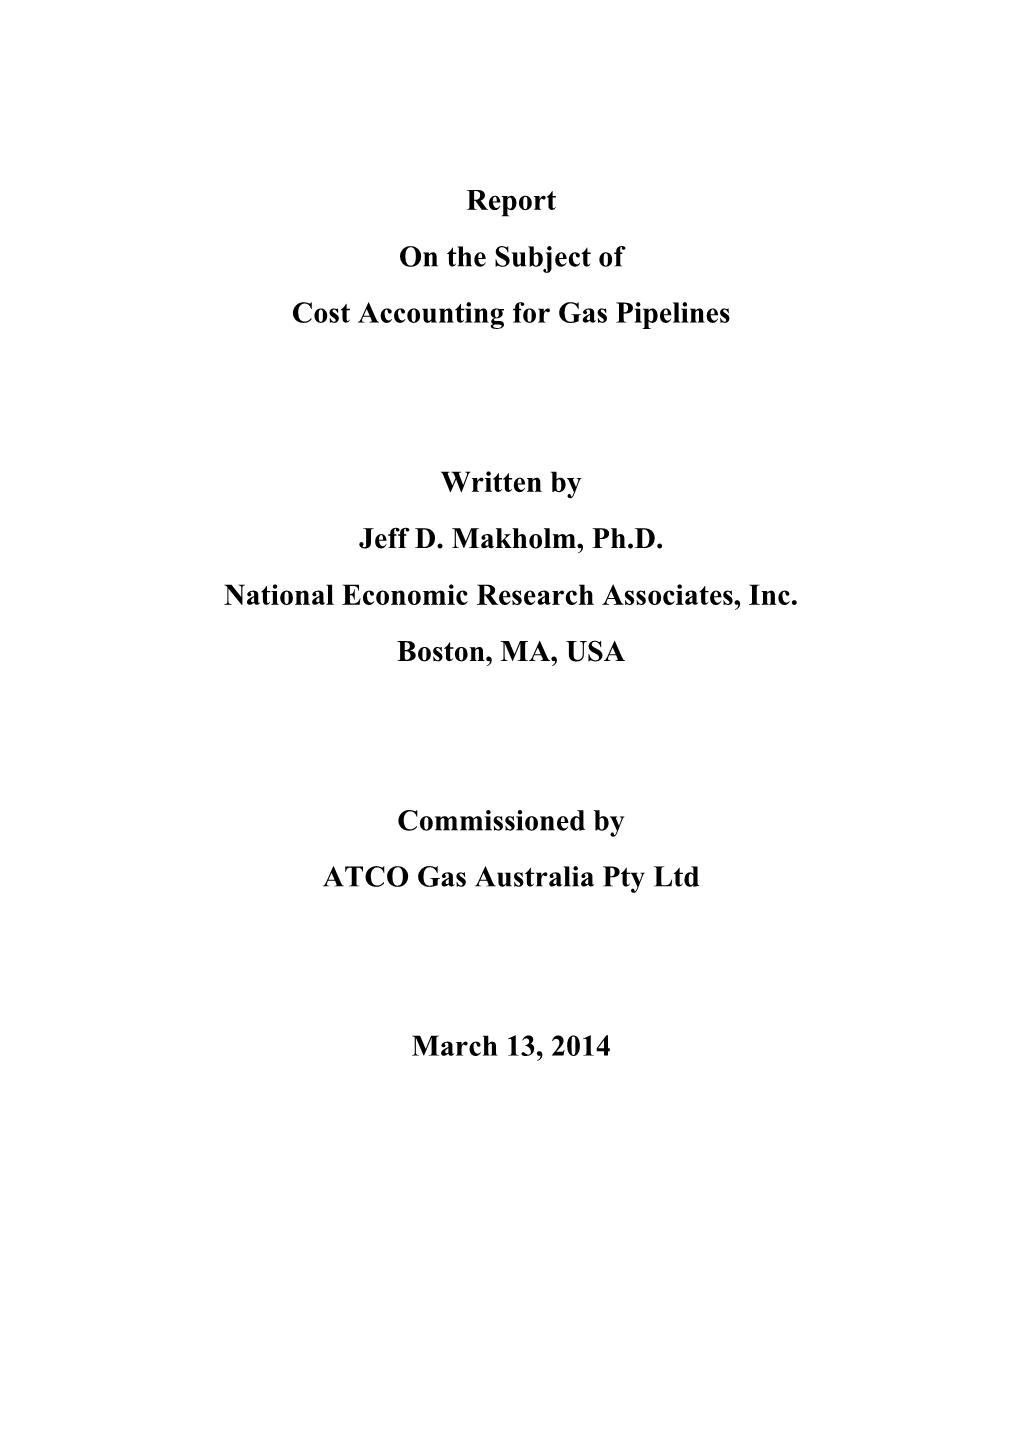 Report on the Subject of Cost Accounting for Gas Pipelines Written by Jeff D. Makholm, Ph.D. National Economic Research Associat